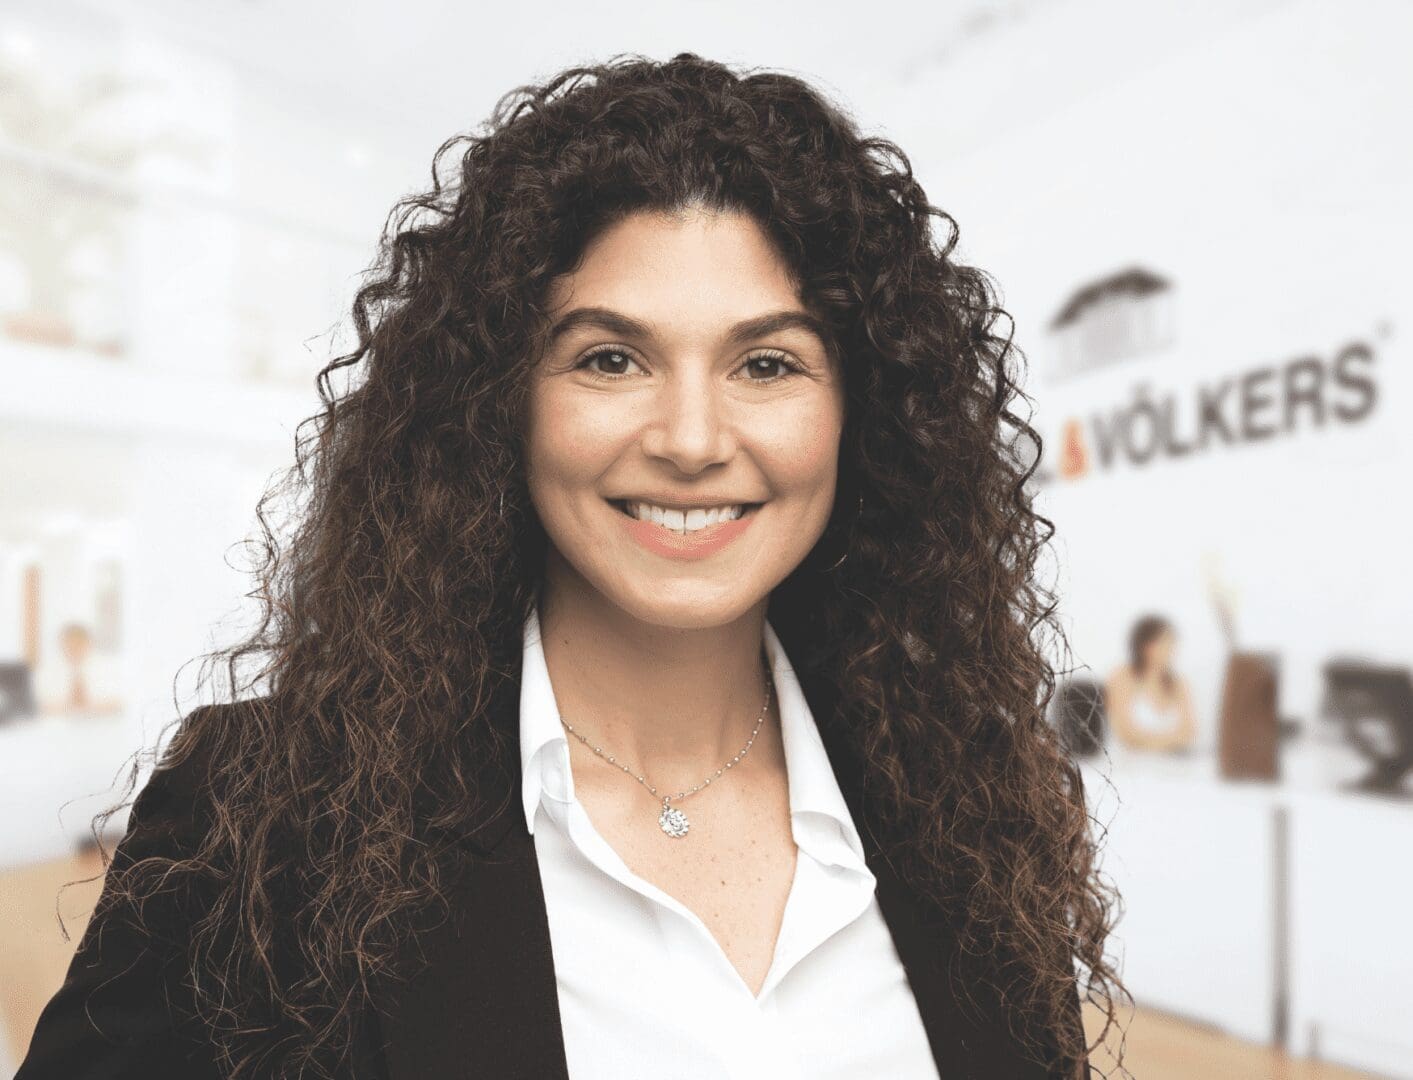 A woman with curly hair smiling in an office.